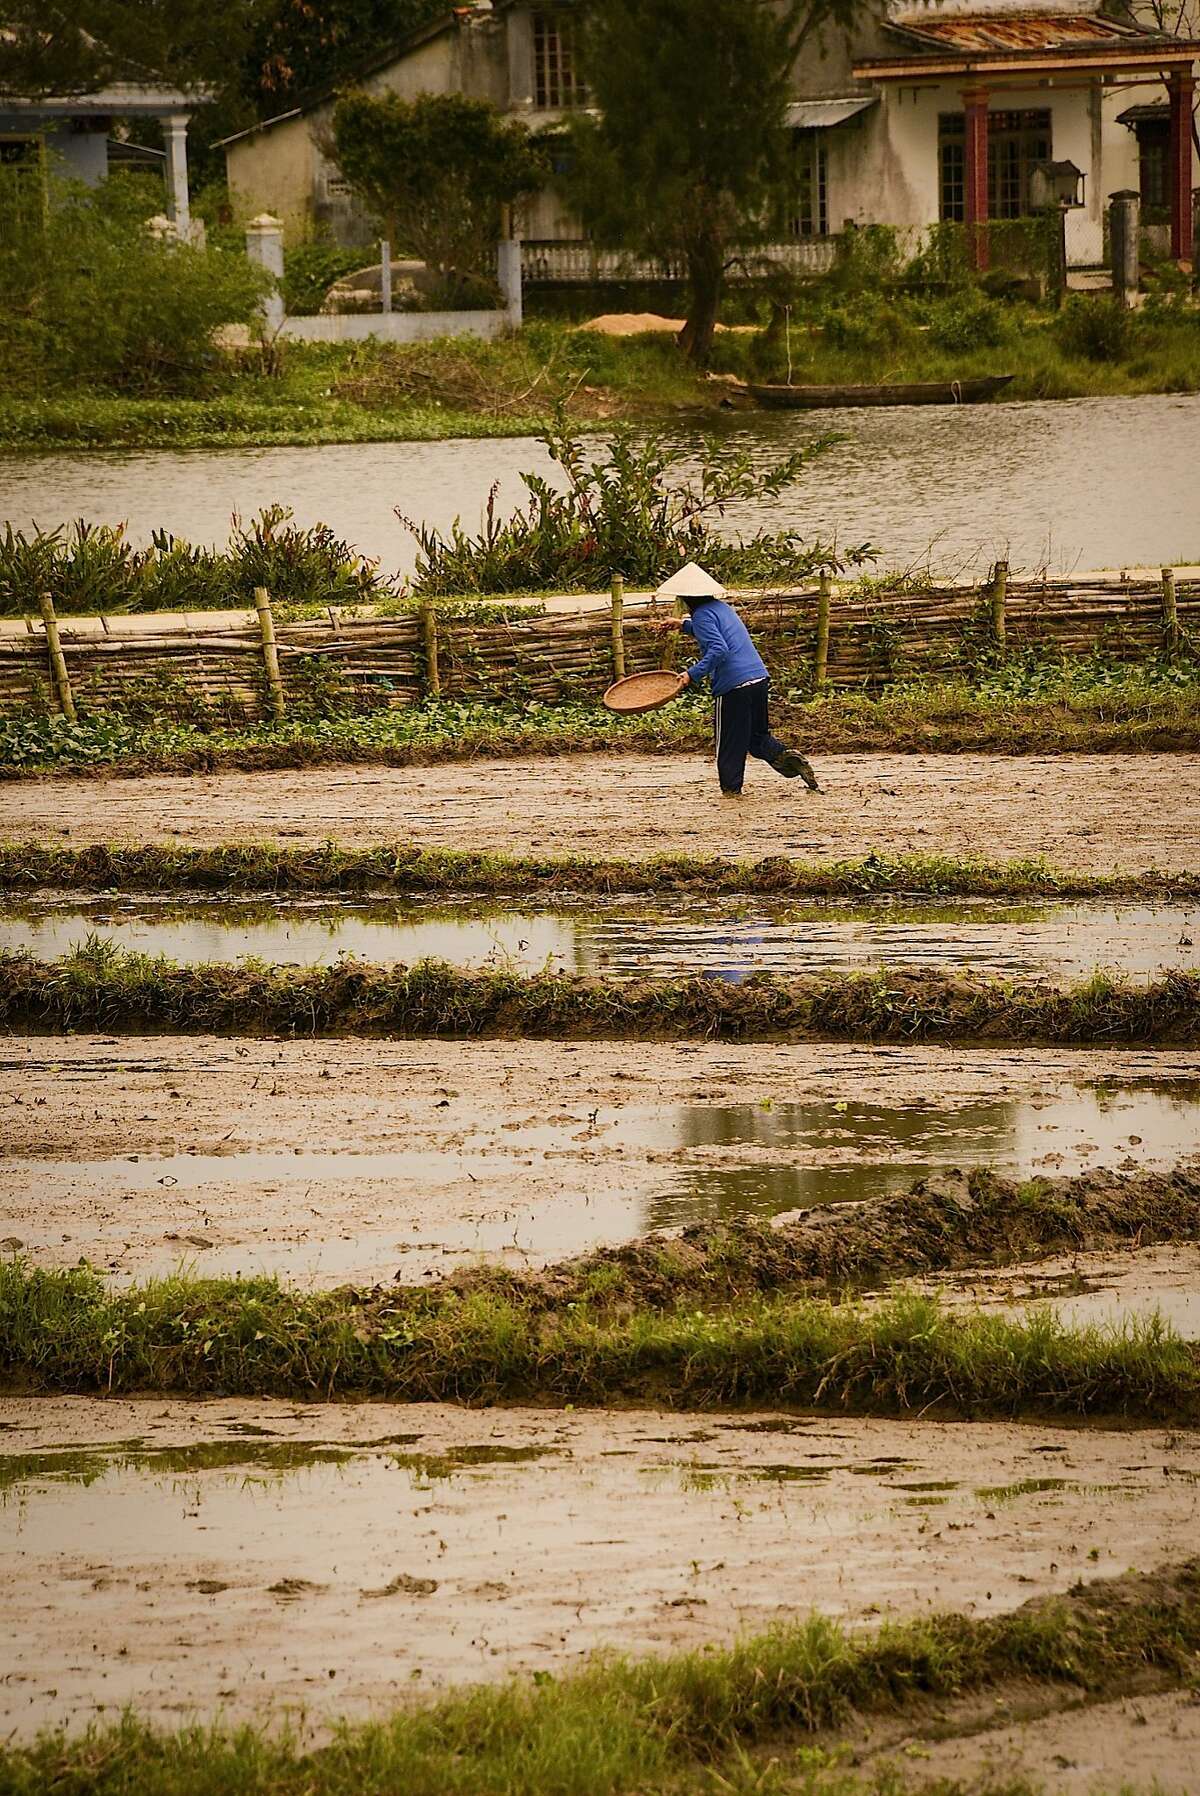 Immediately outside Hoi An, rice paddies abound in various stages of growth and harvest.